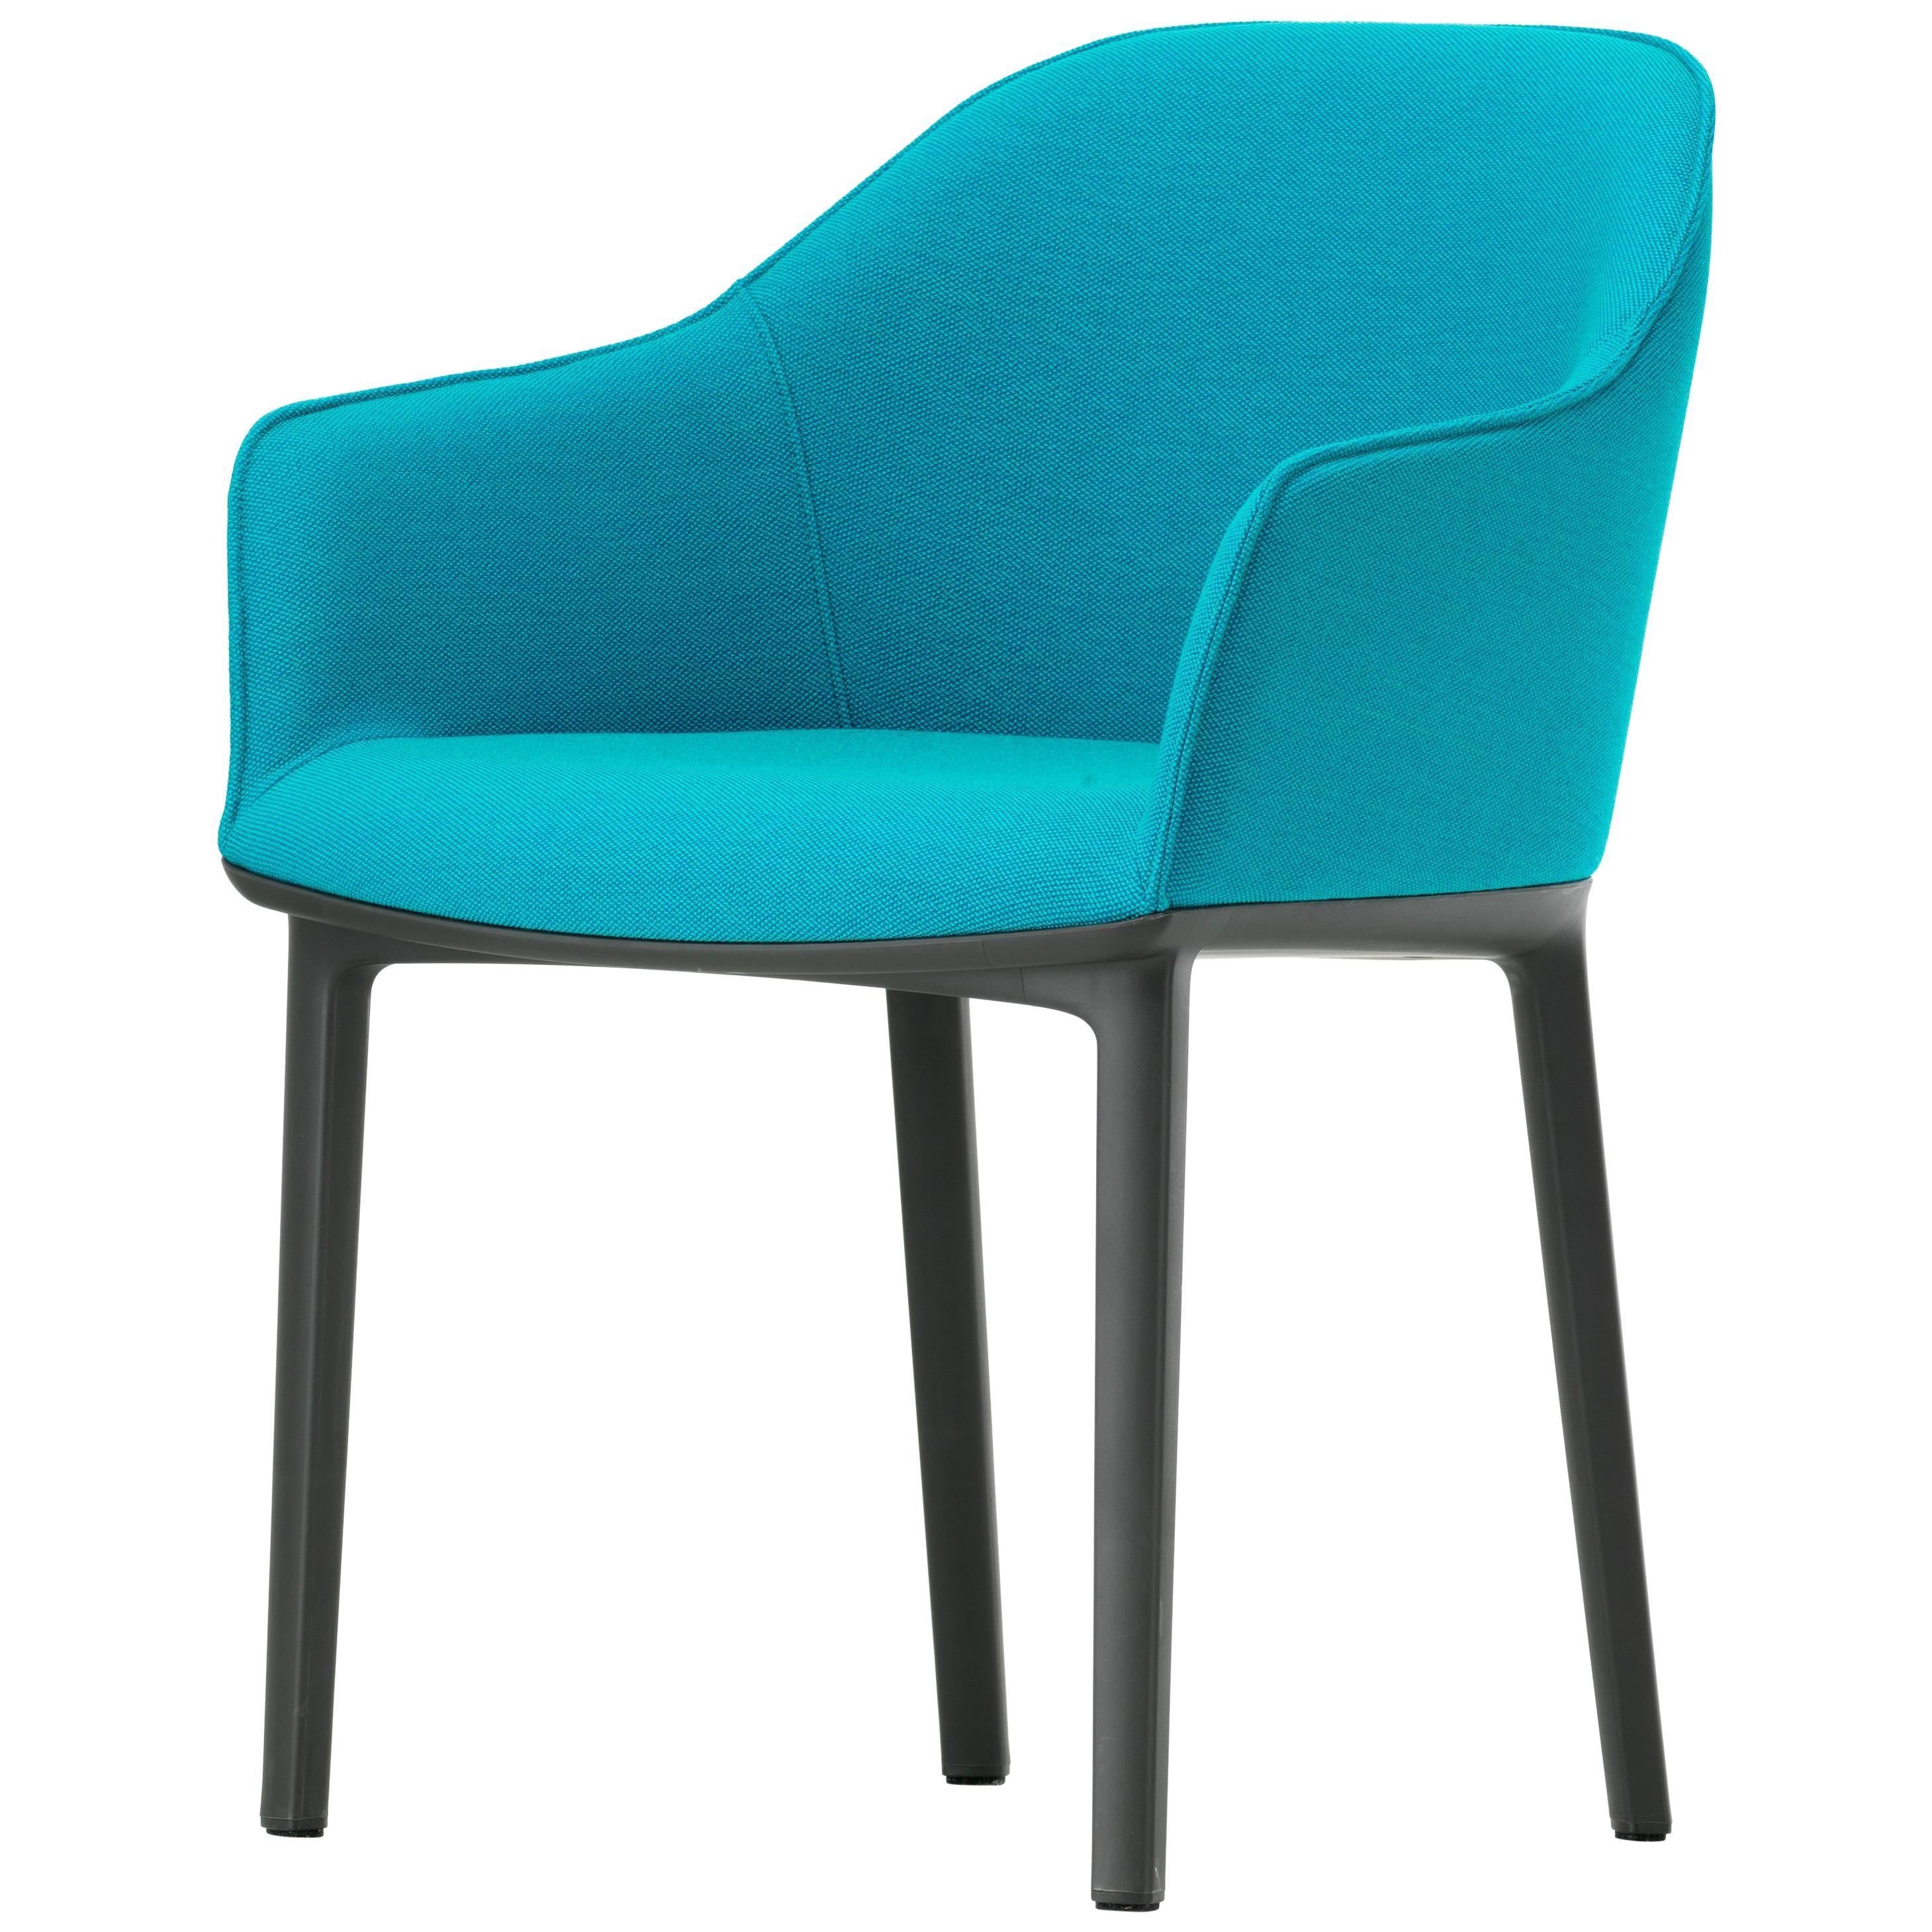 Vitra Soft Shell Chair in Turquoise & Aqua Moss by Ronan & Erwan Bouroullec For Sale